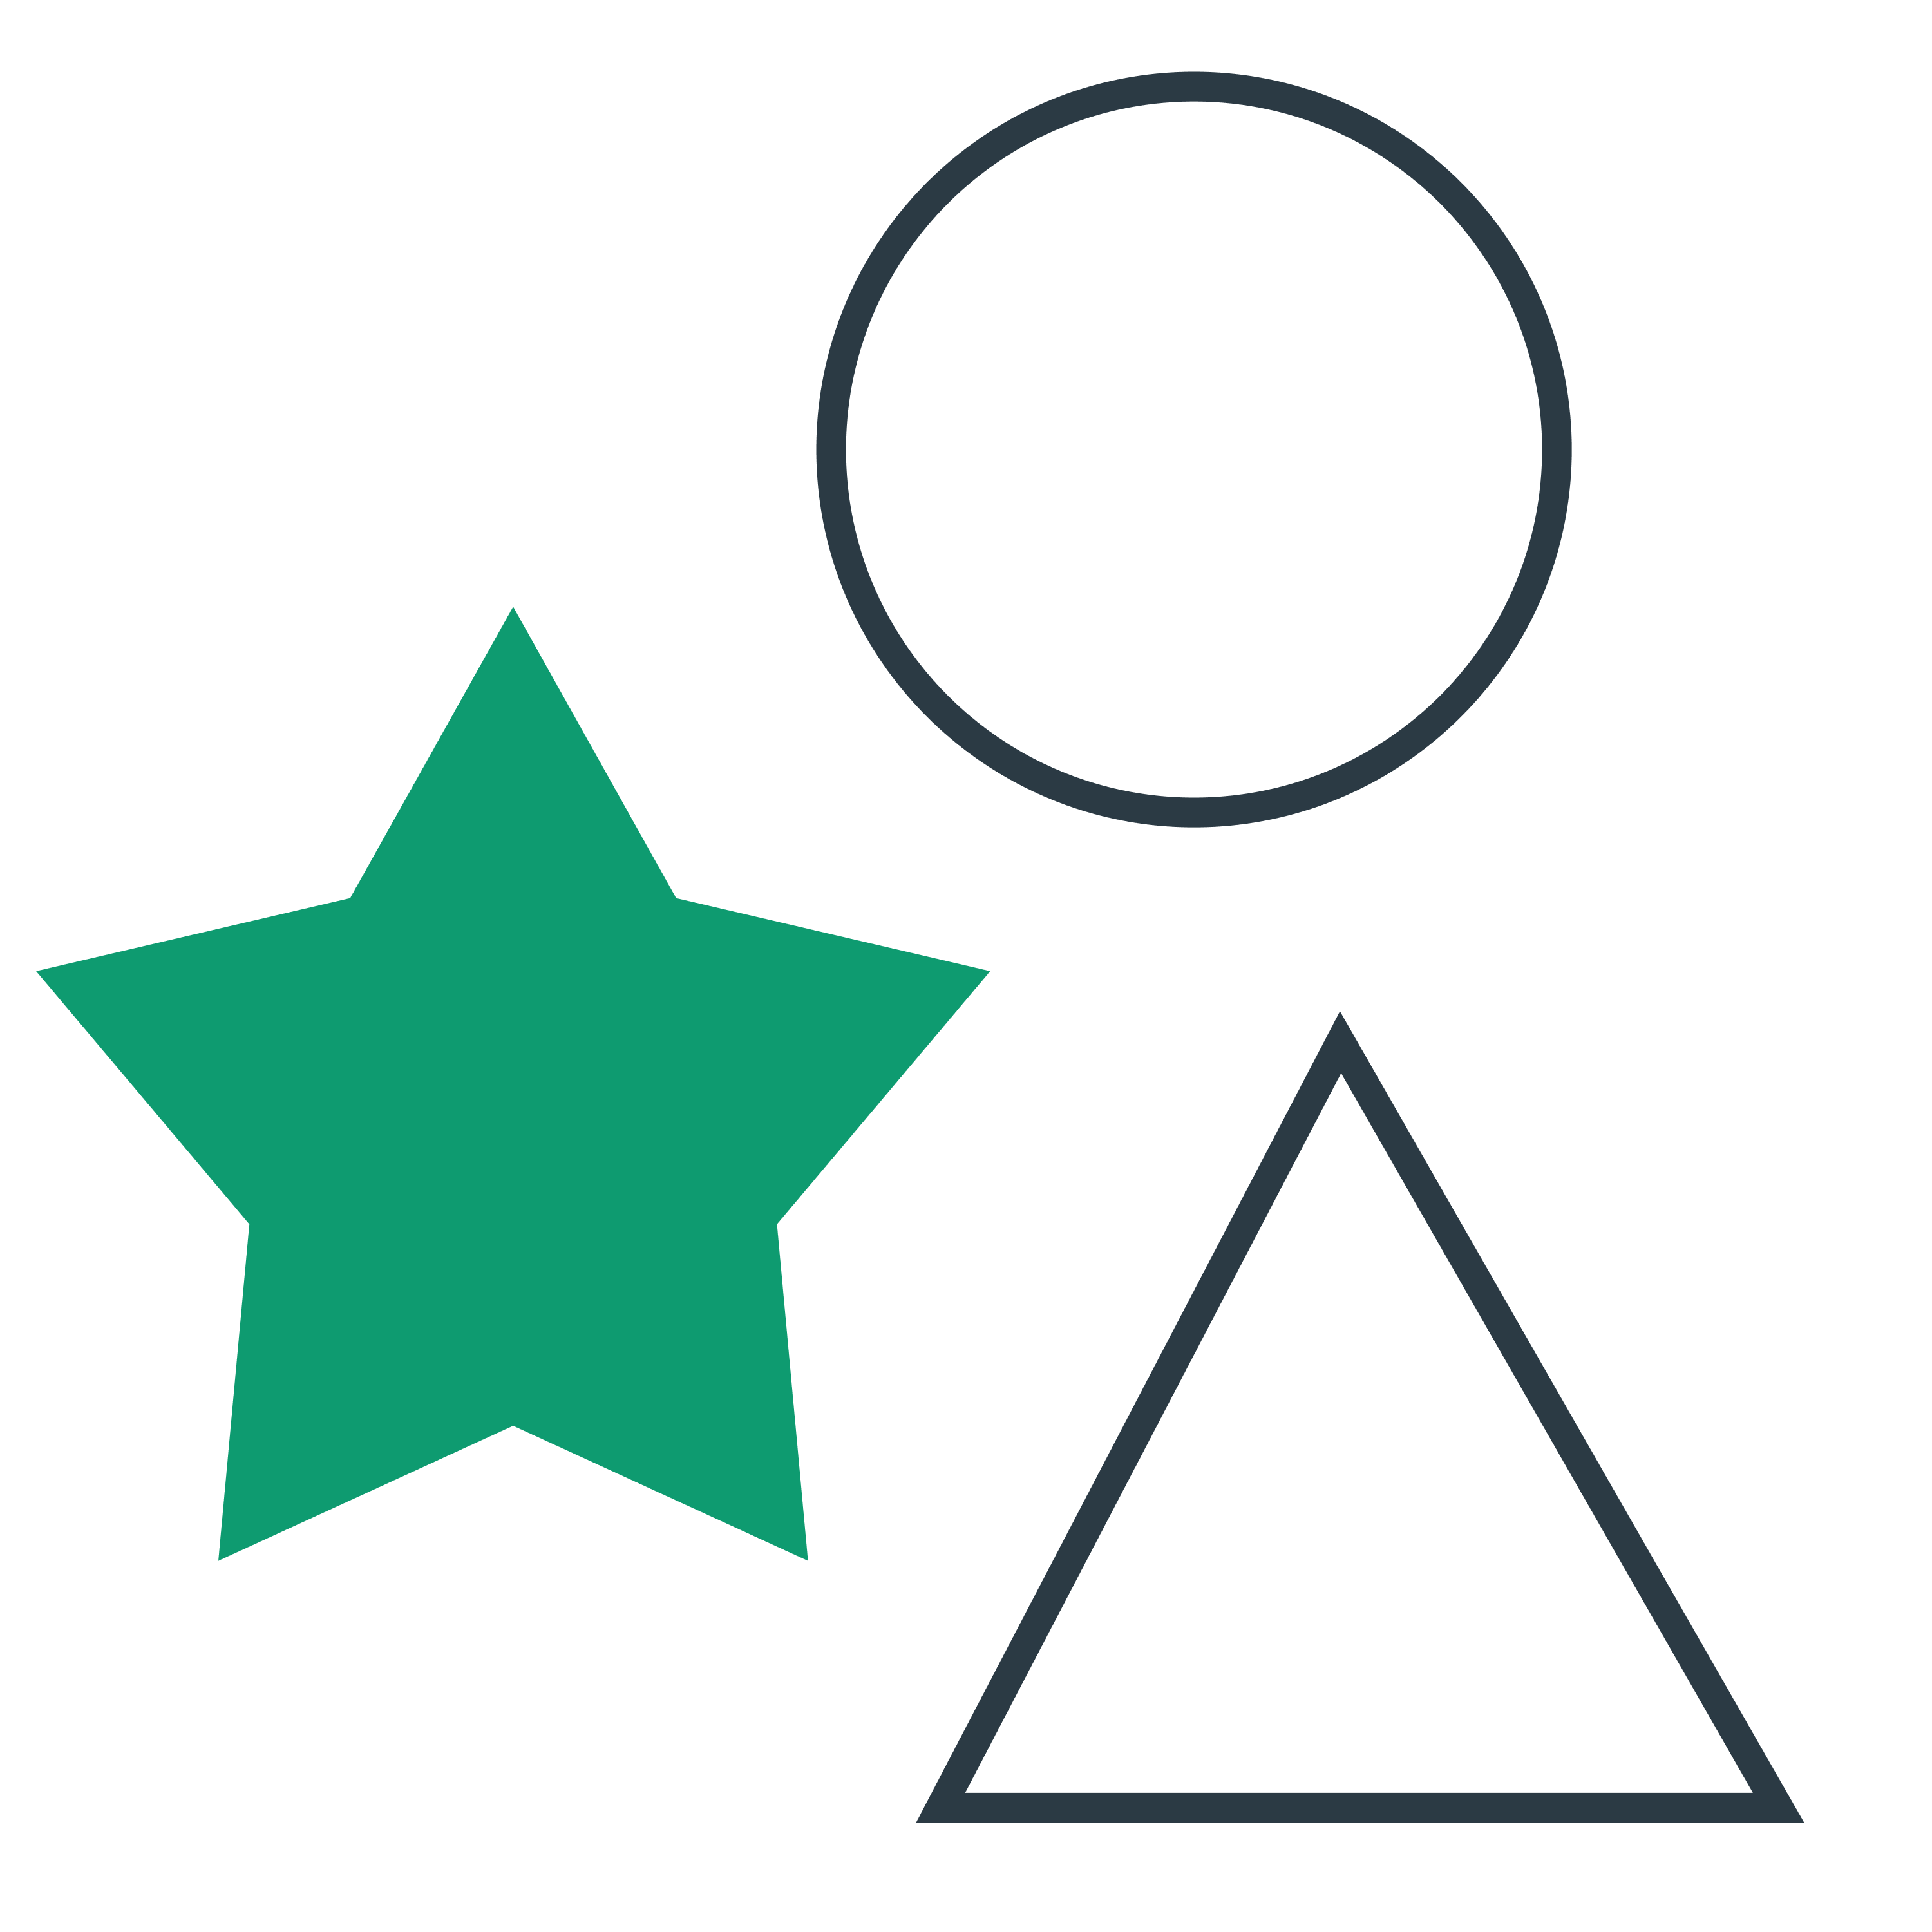 Size=64px, Icon type=shapes star circle triangle